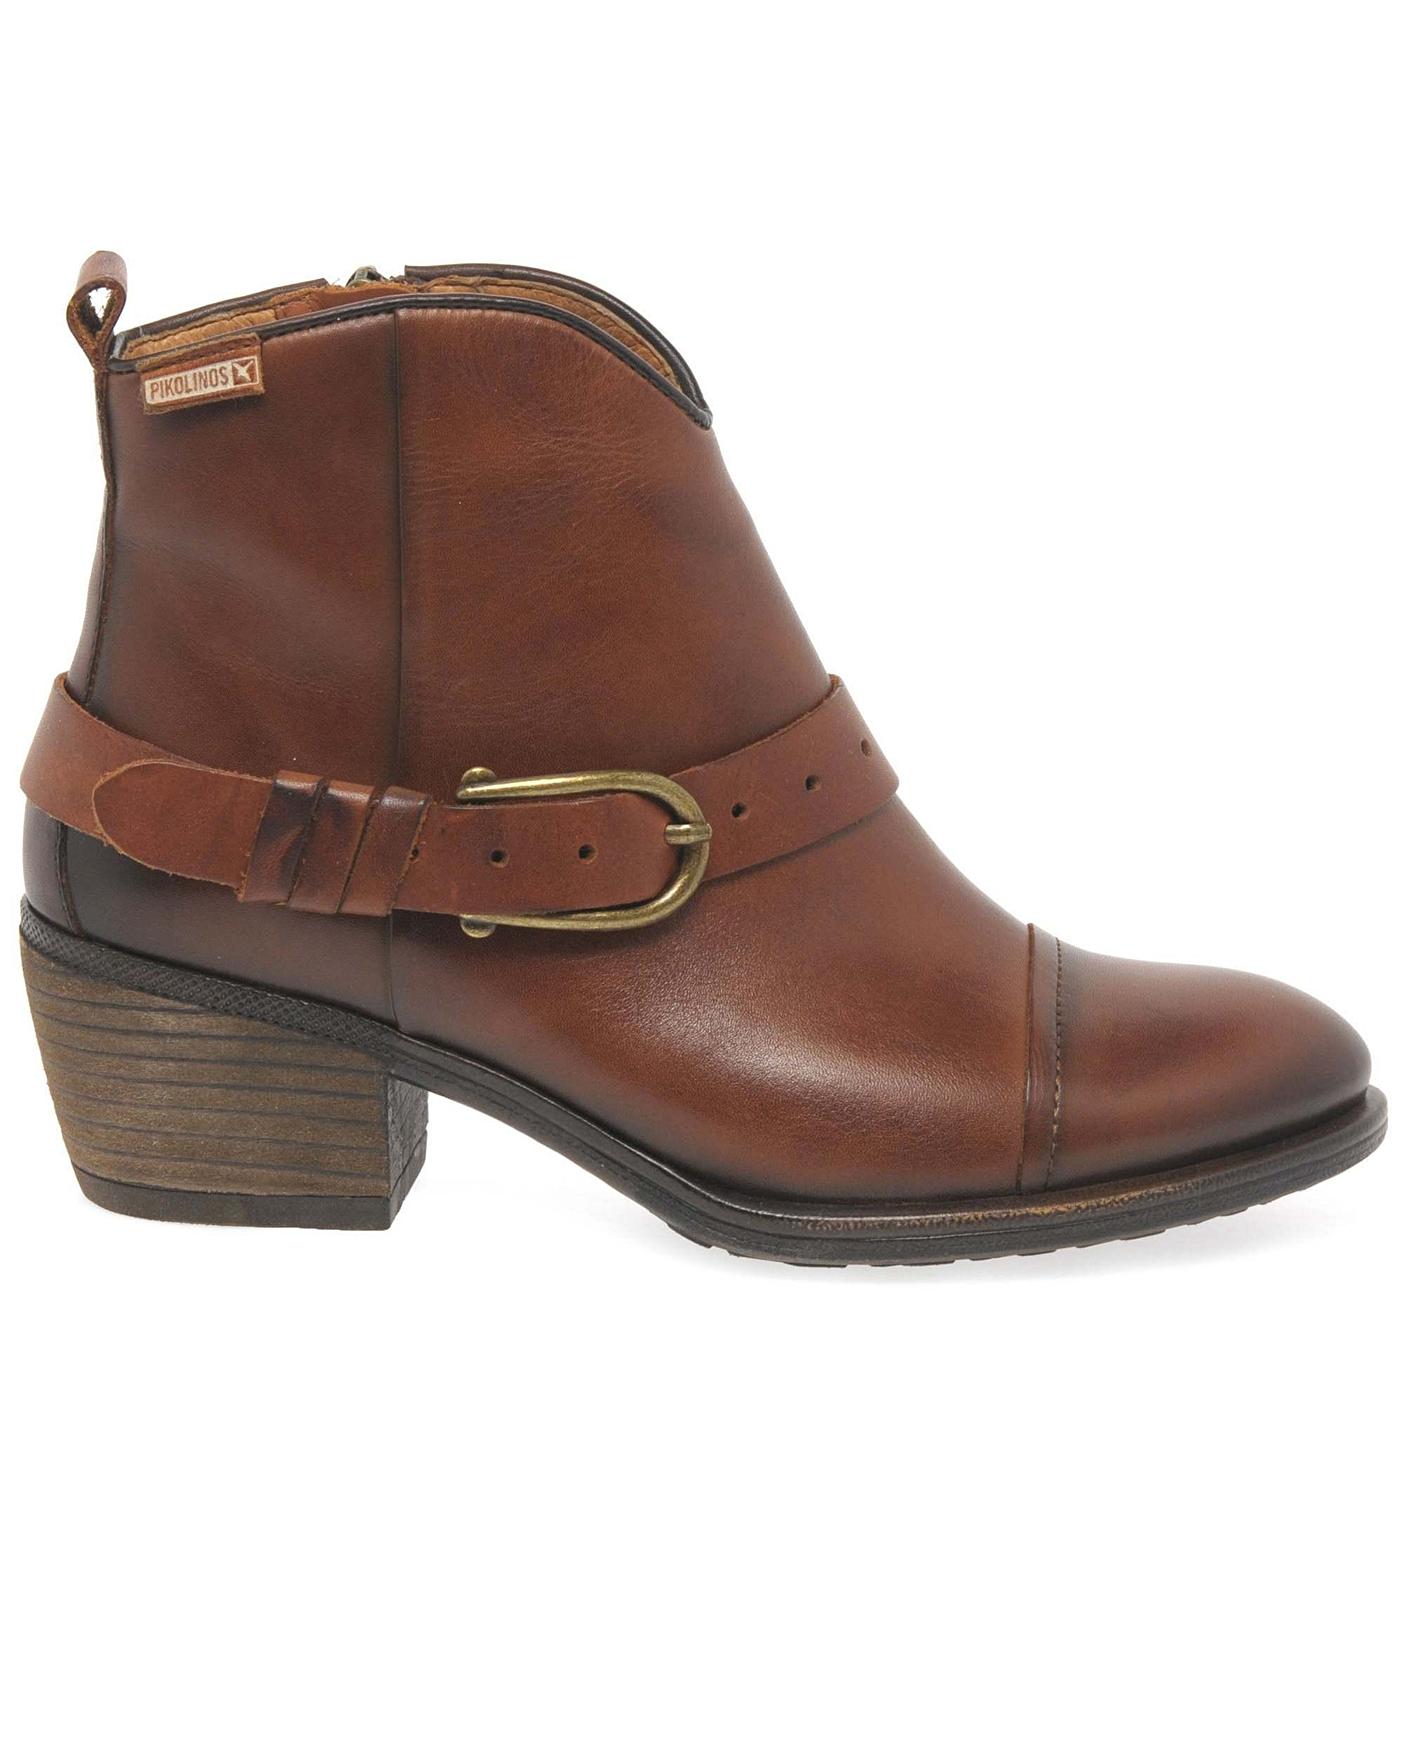 pikolinos ankle boots uk